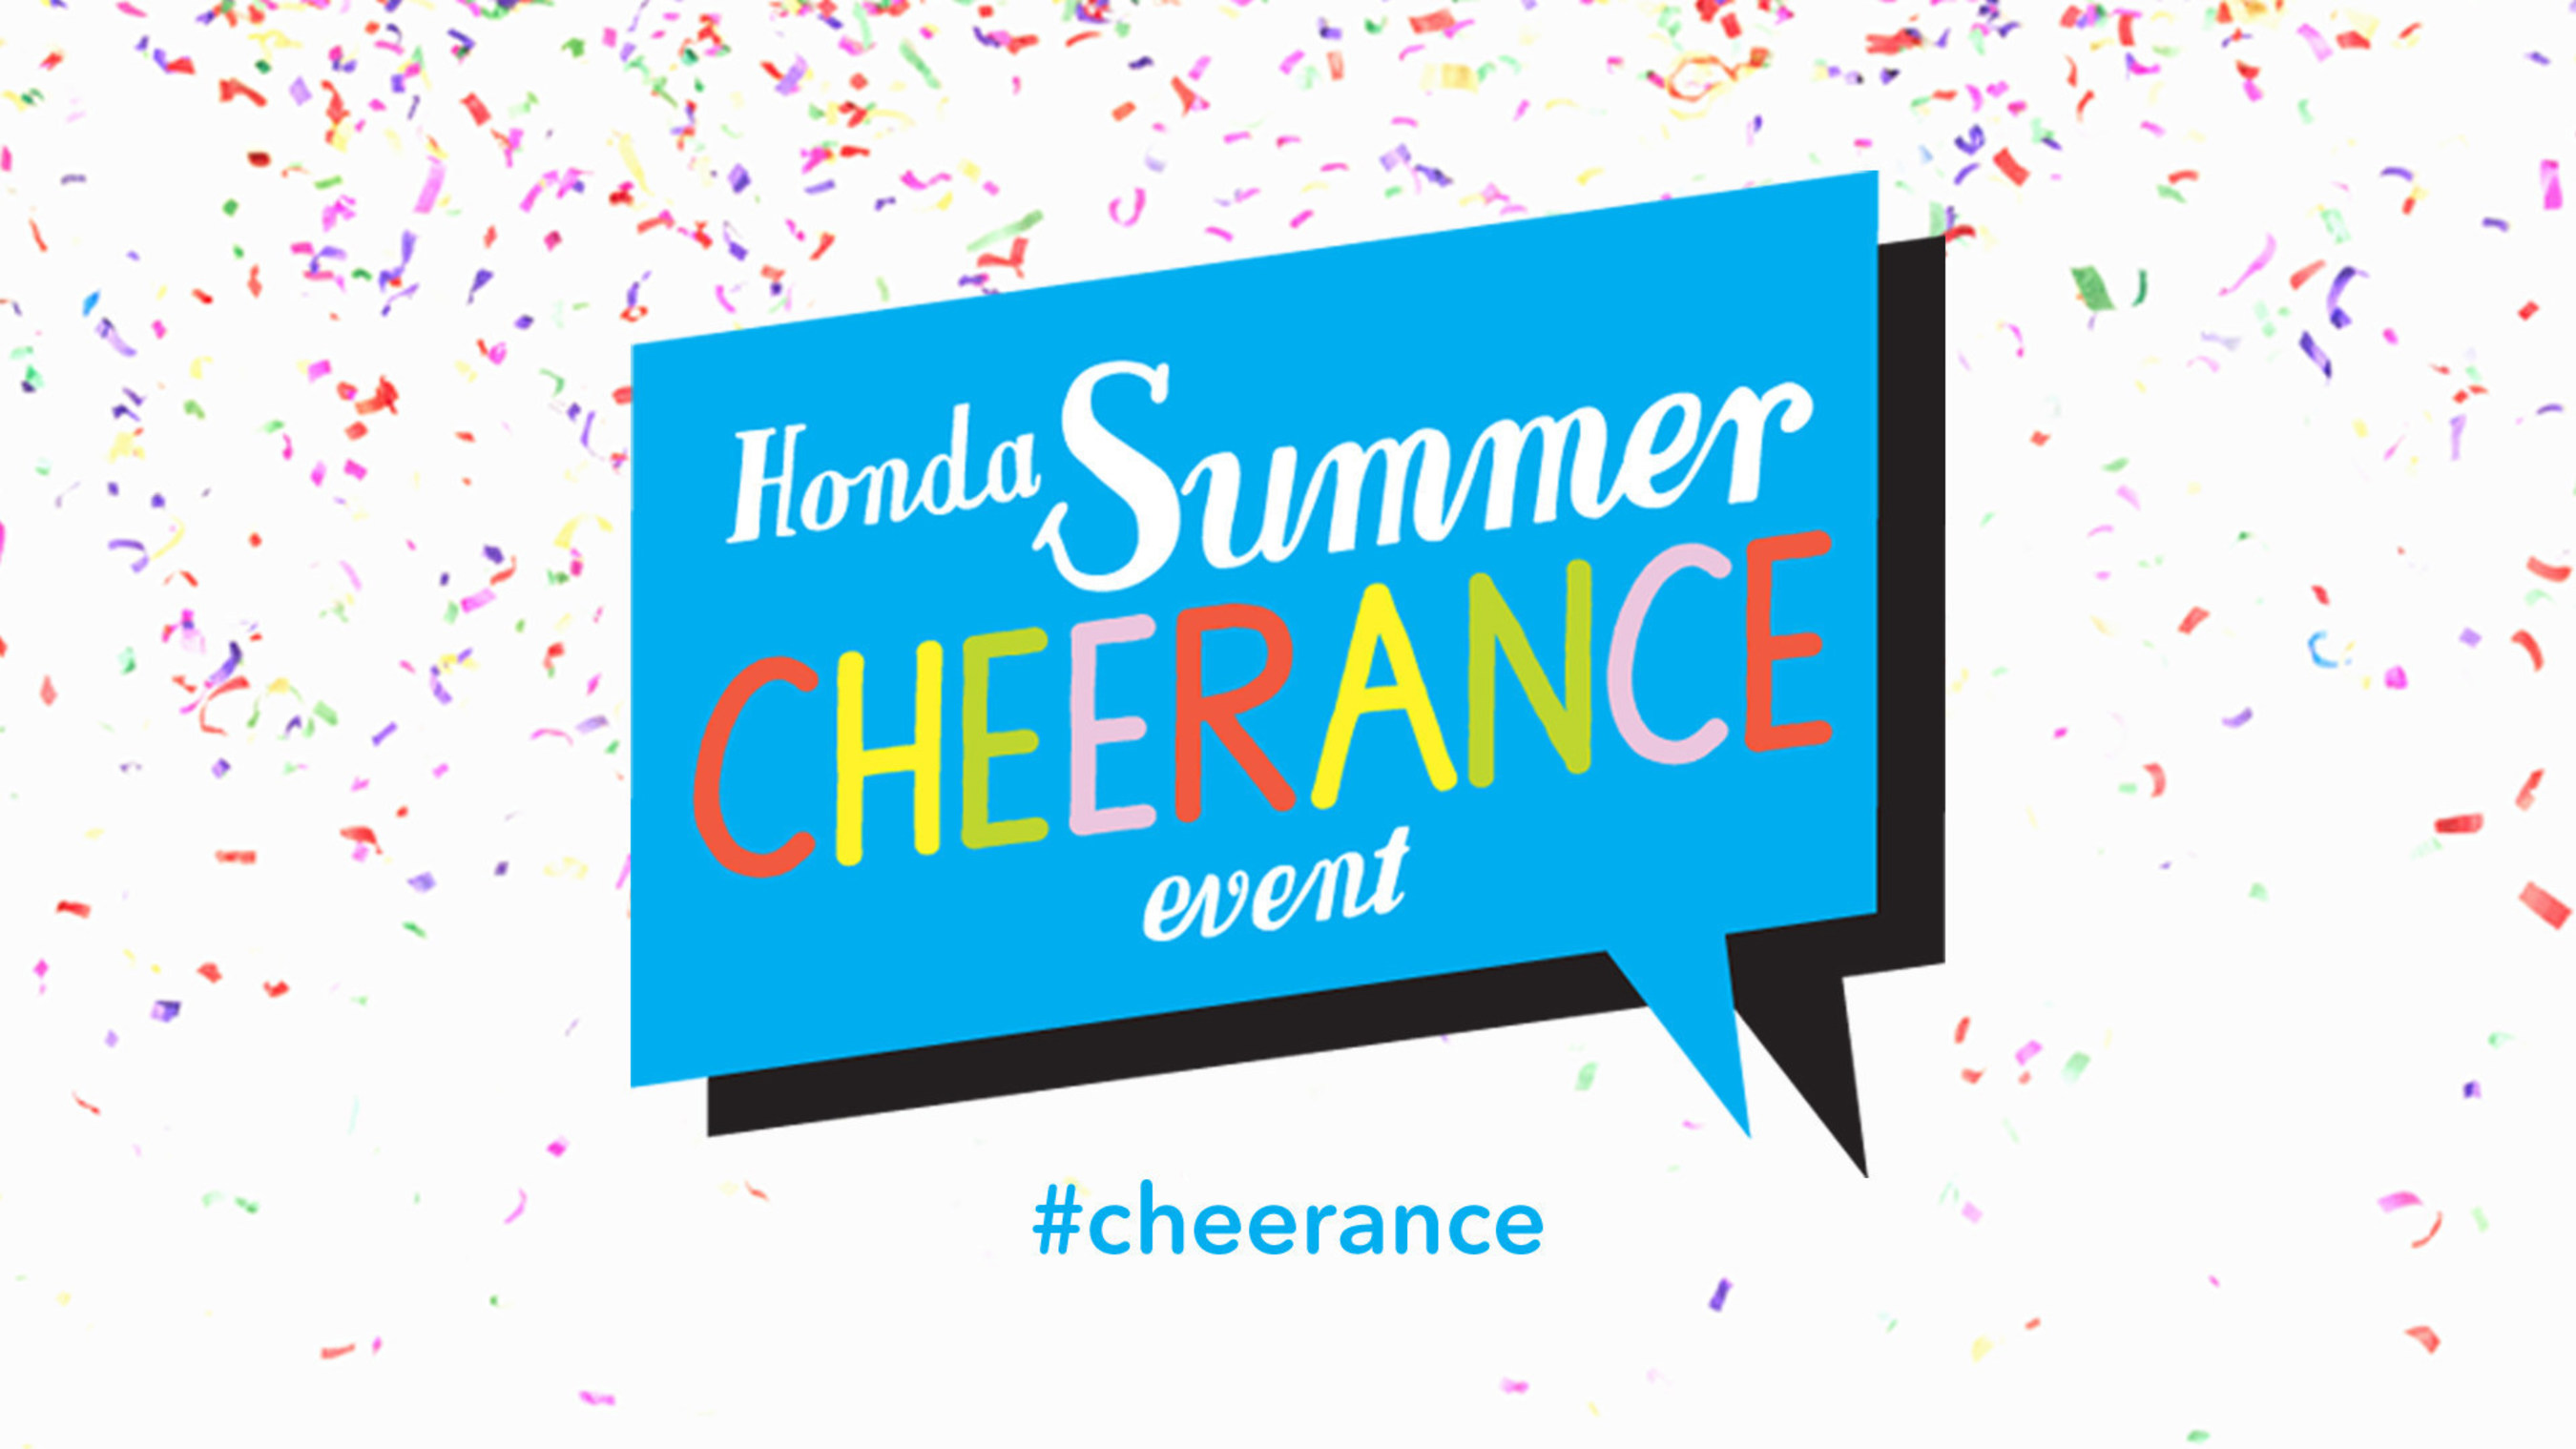 Honda Launches Summer #Cheerance Event Spreading Cheer to Three